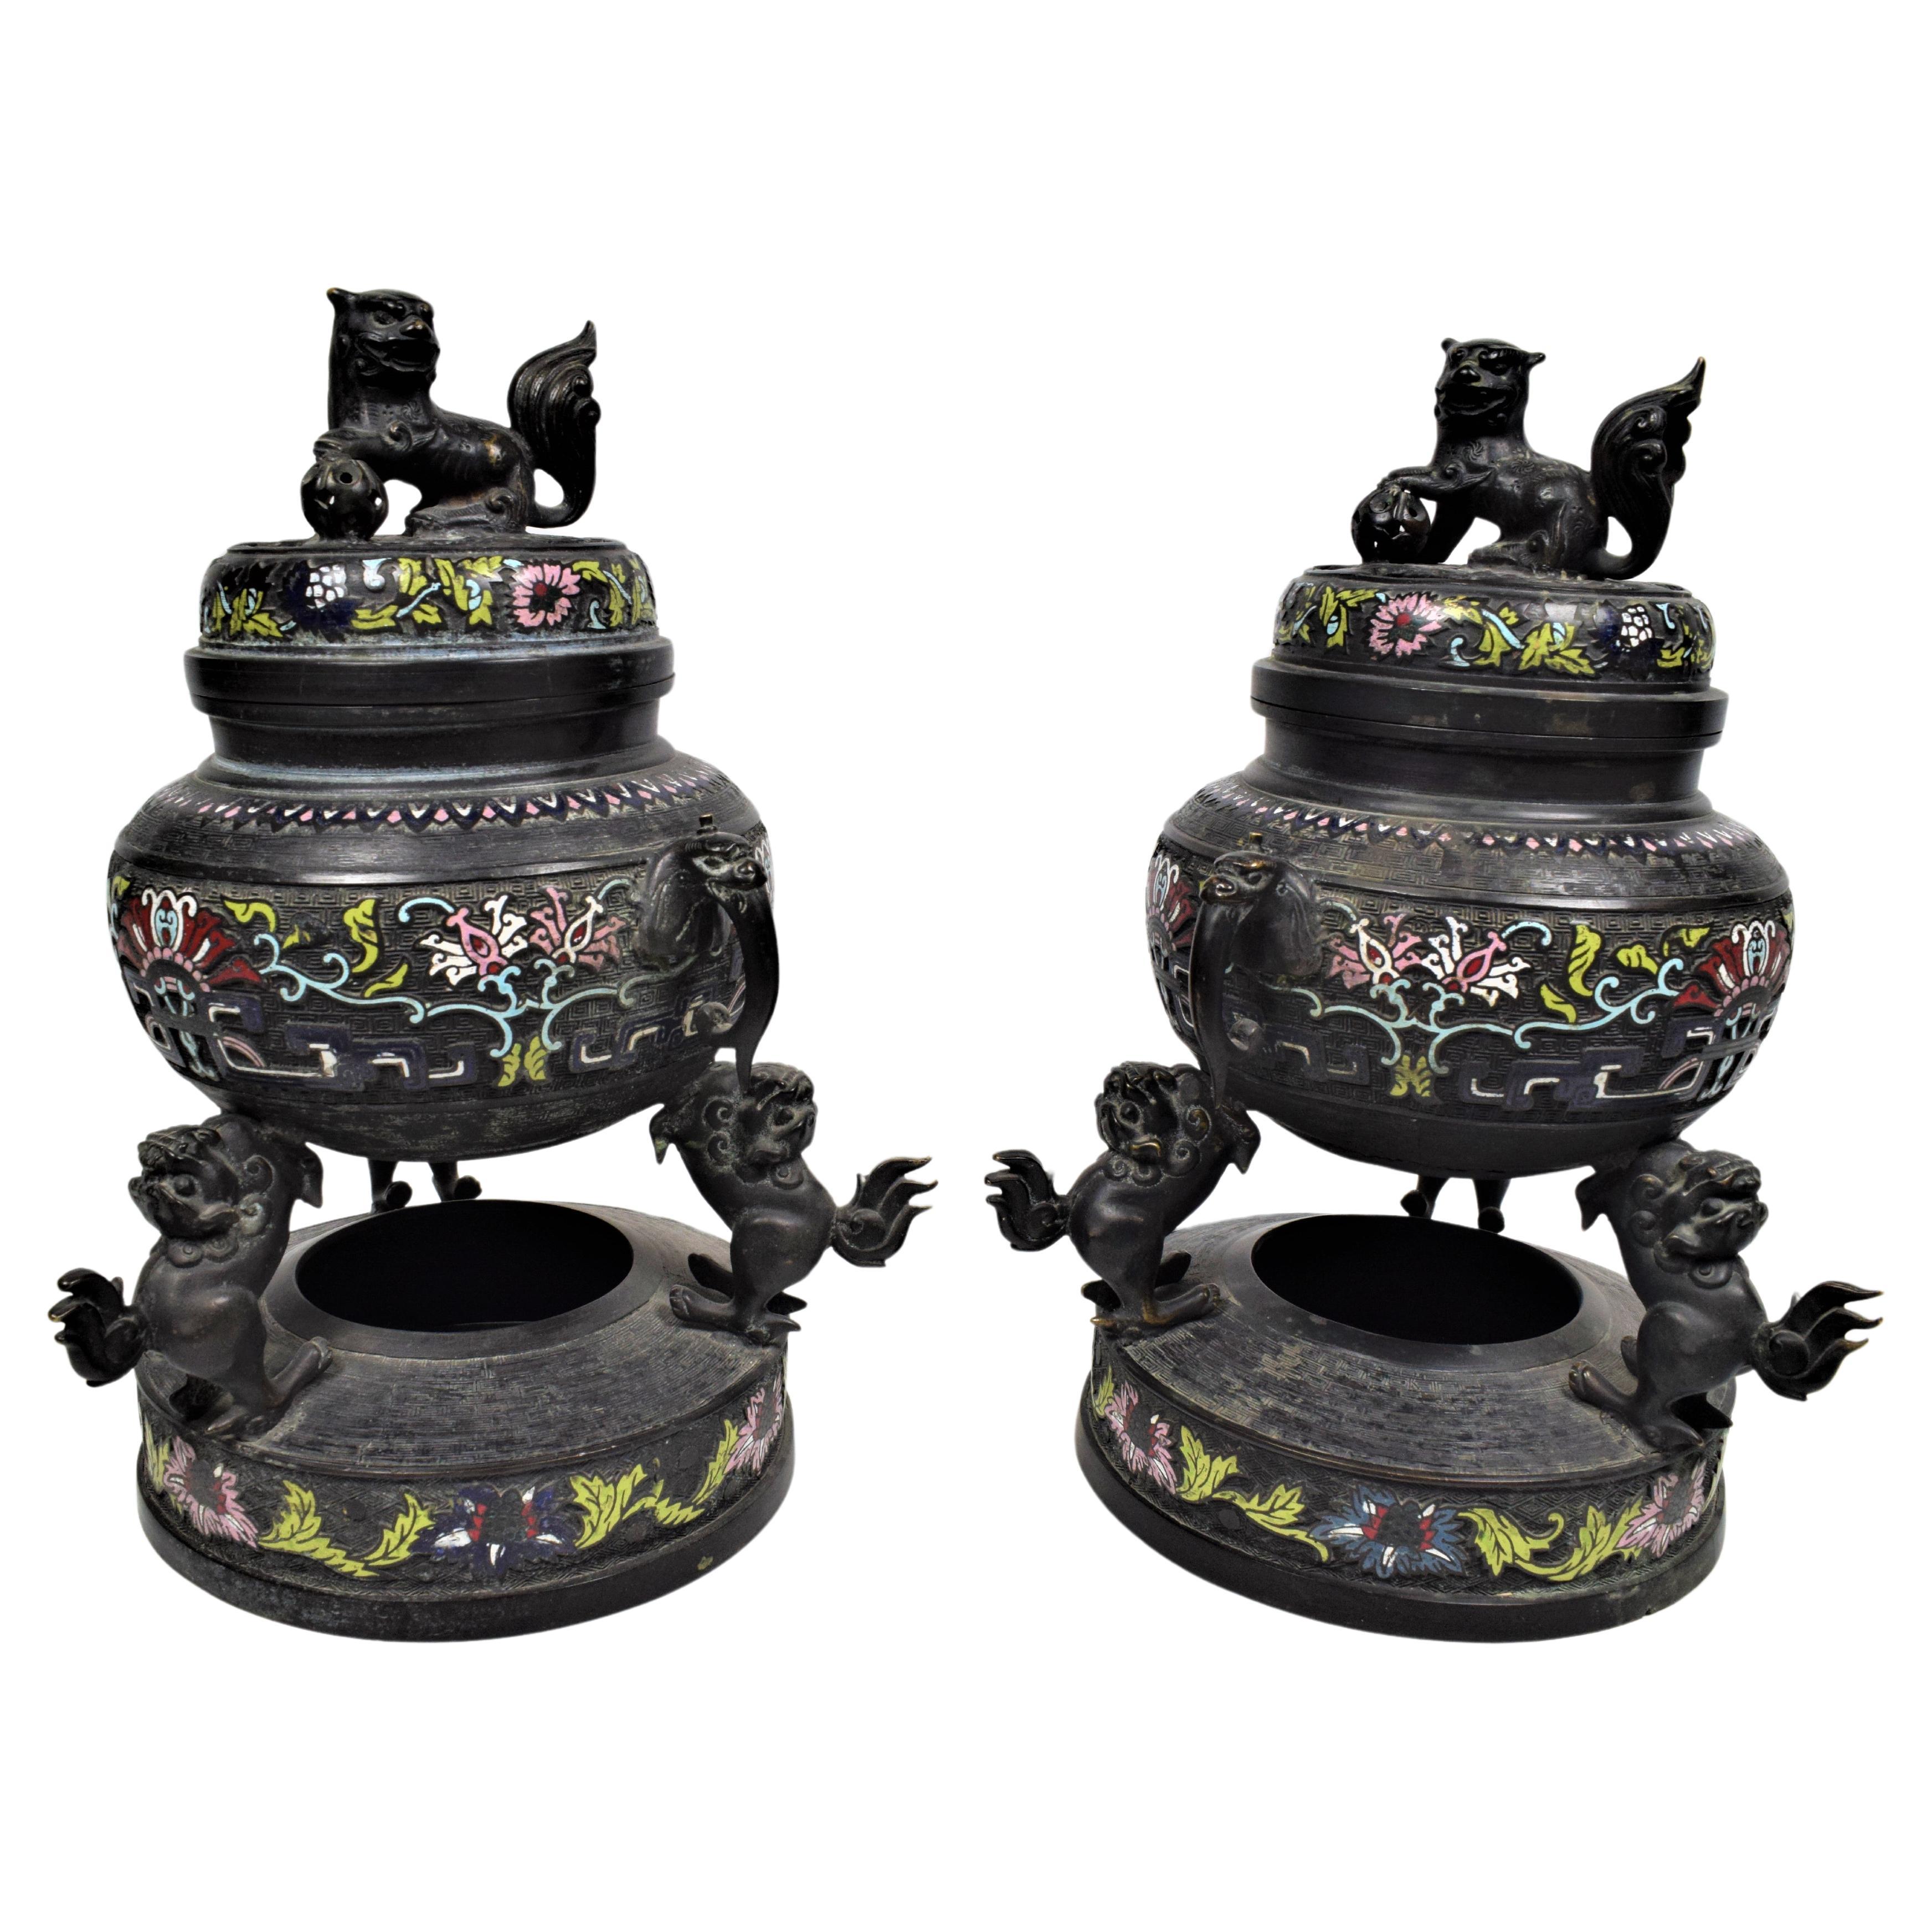 Pair Of Chinese Cloisonne Gilt Bronze Dragon Incense Burners, Late 19th Century For Sale